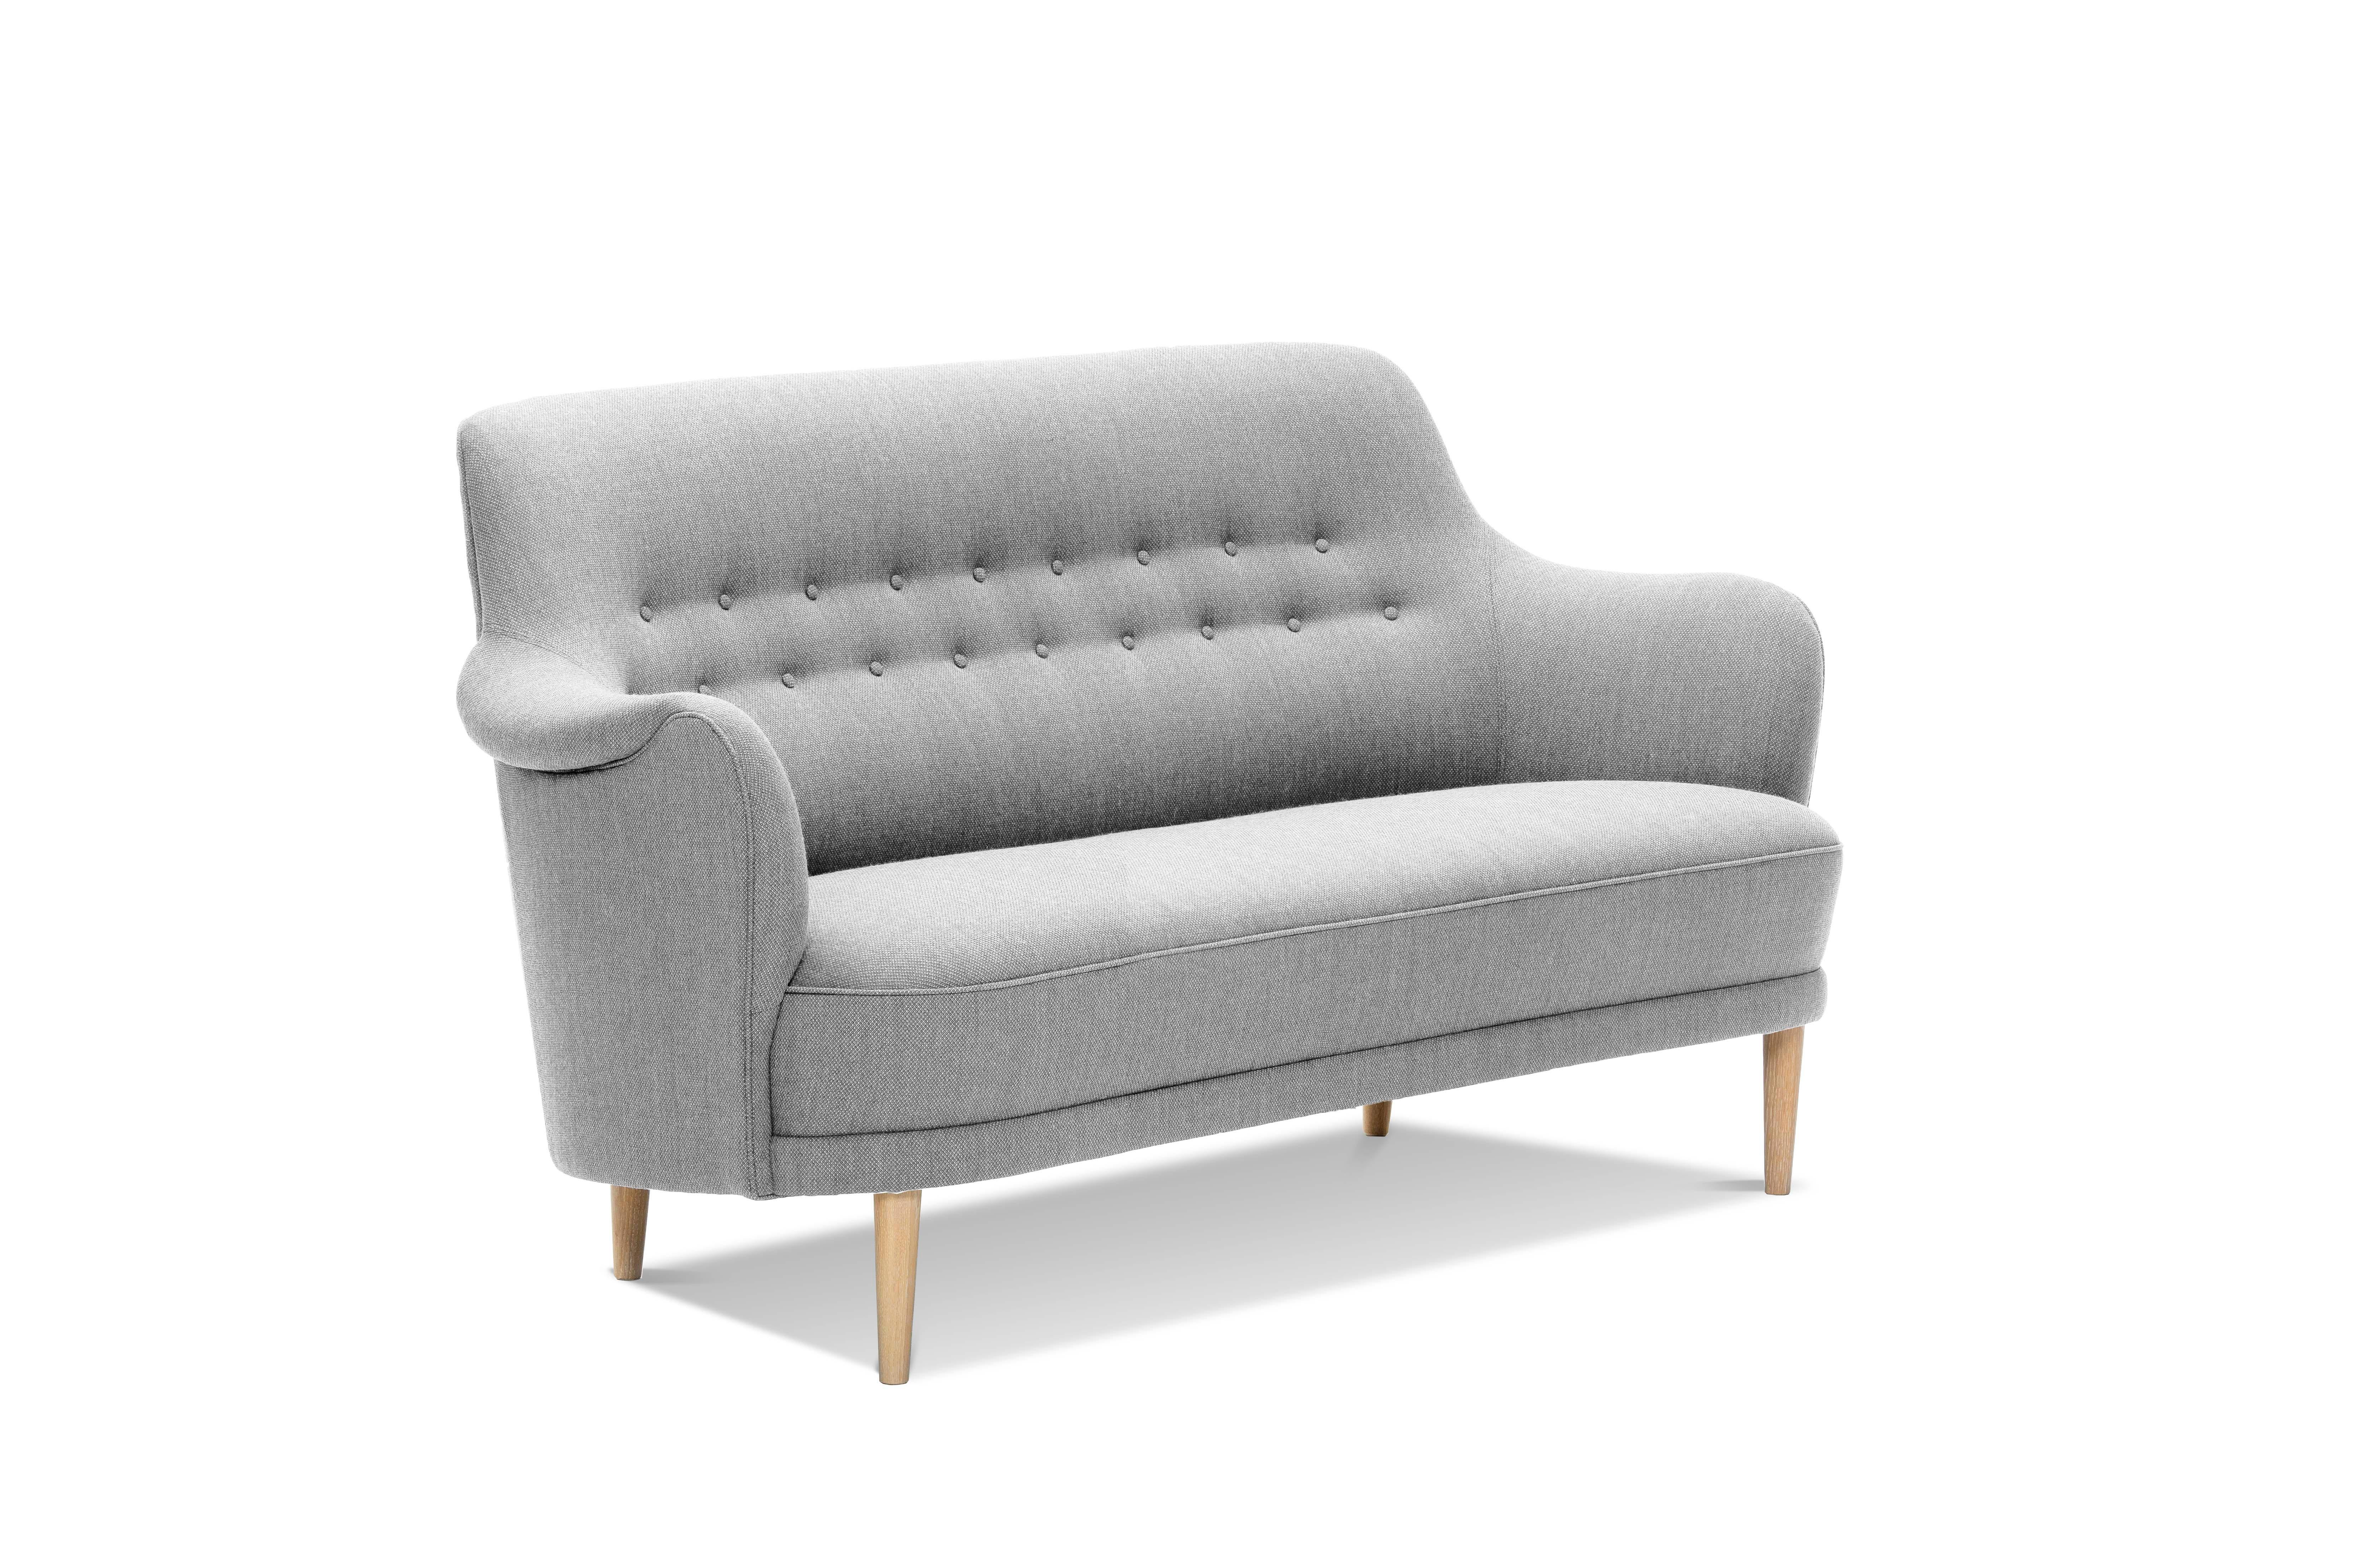 Samsas was designed in 1960 and is regarded as the most typical item of Carl Malmsten's upholstered furniture. The Samsas model is a further development of the original Konsert armchair model, which Carl Malmsten designed for the Stockholm Concert